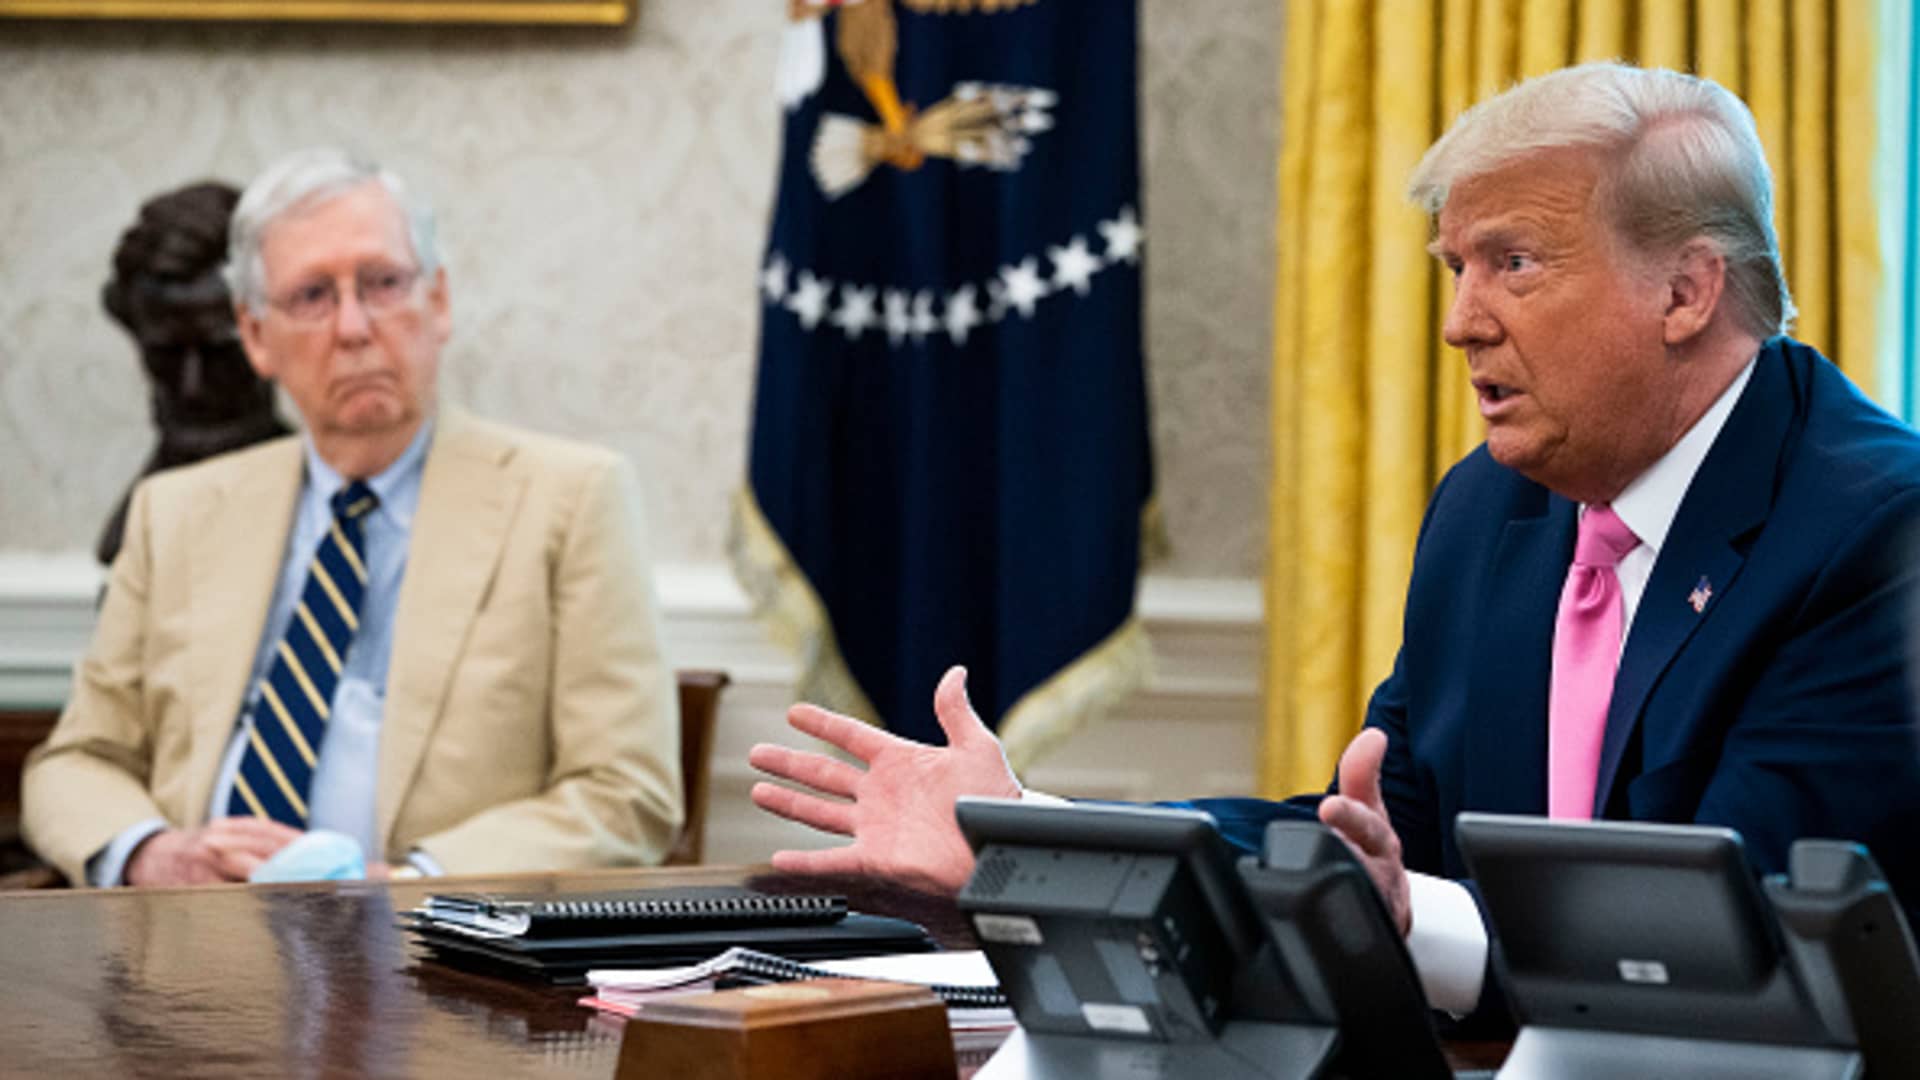 Senate Majority Leader Mitch McConnell, R-Ky., and President Donald Trump at an Oval Office cabinet meeting on July 20, 2020.